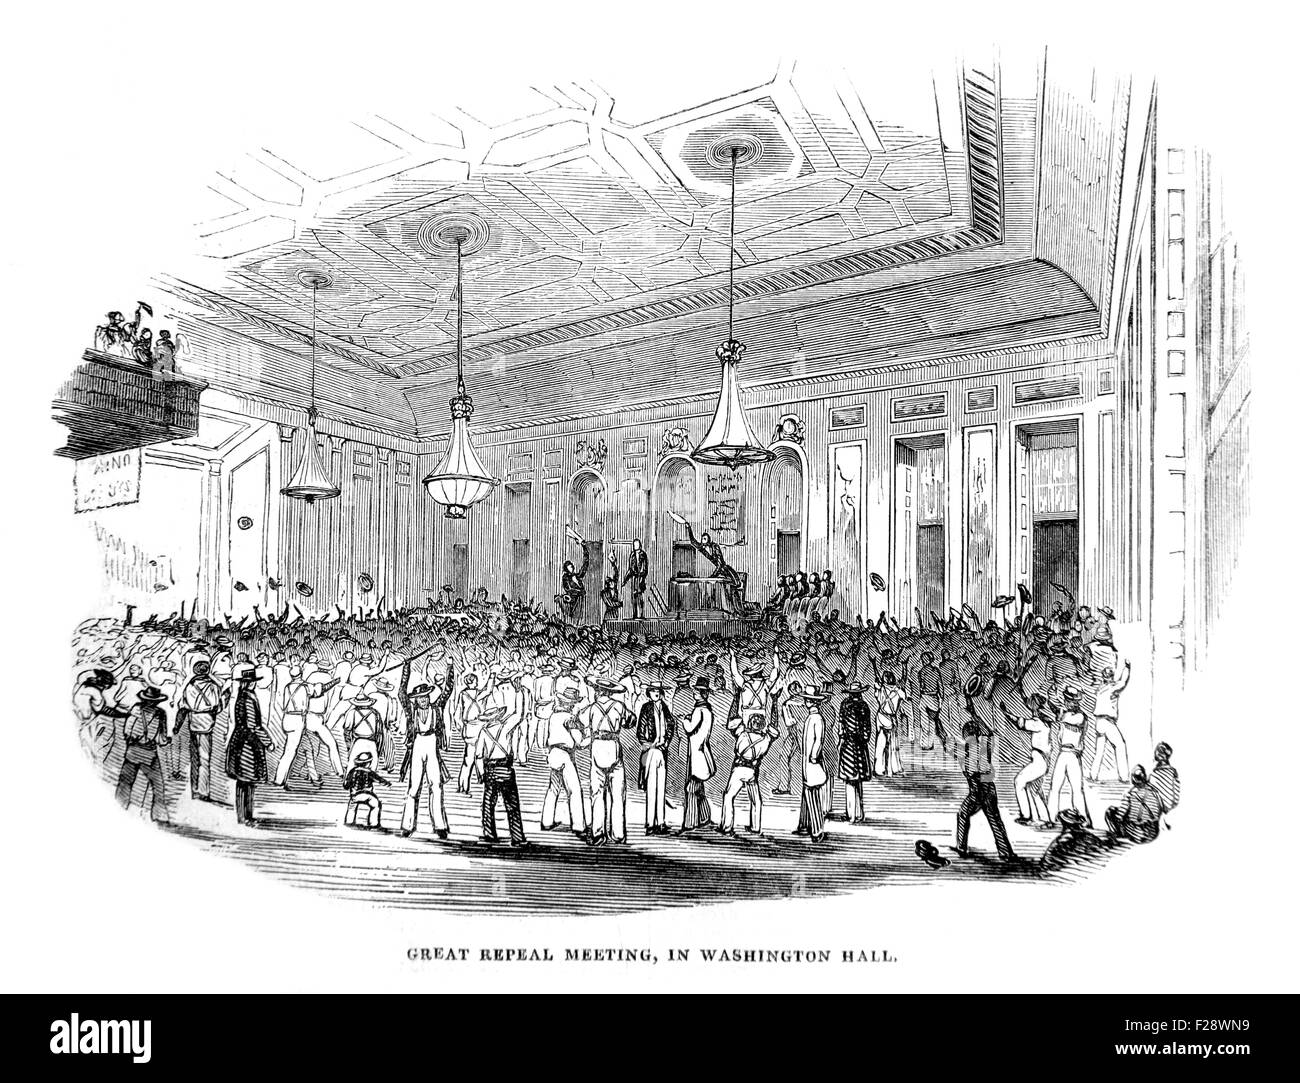 Great Repeal Meeting in Washington Hall June 1844, Illustrated London News July 1844; Black and White Illustration; Stock Photo